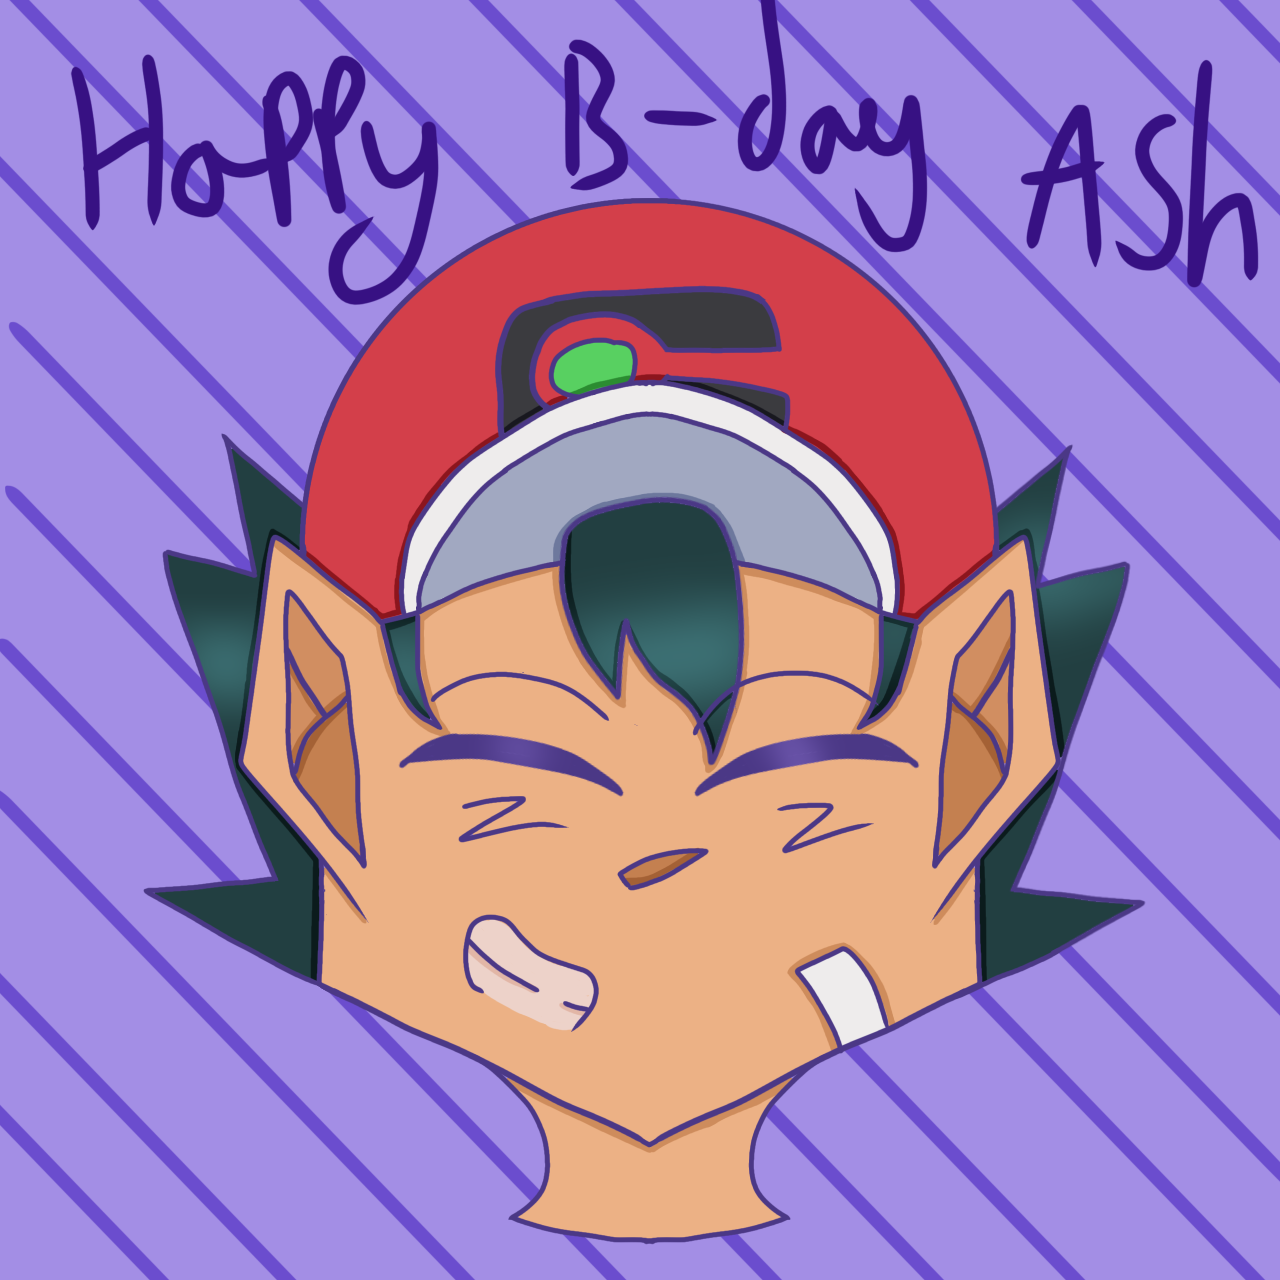 aster-nova:Happy forever 10th birthday to the soon to be Pokemon master that is Ash